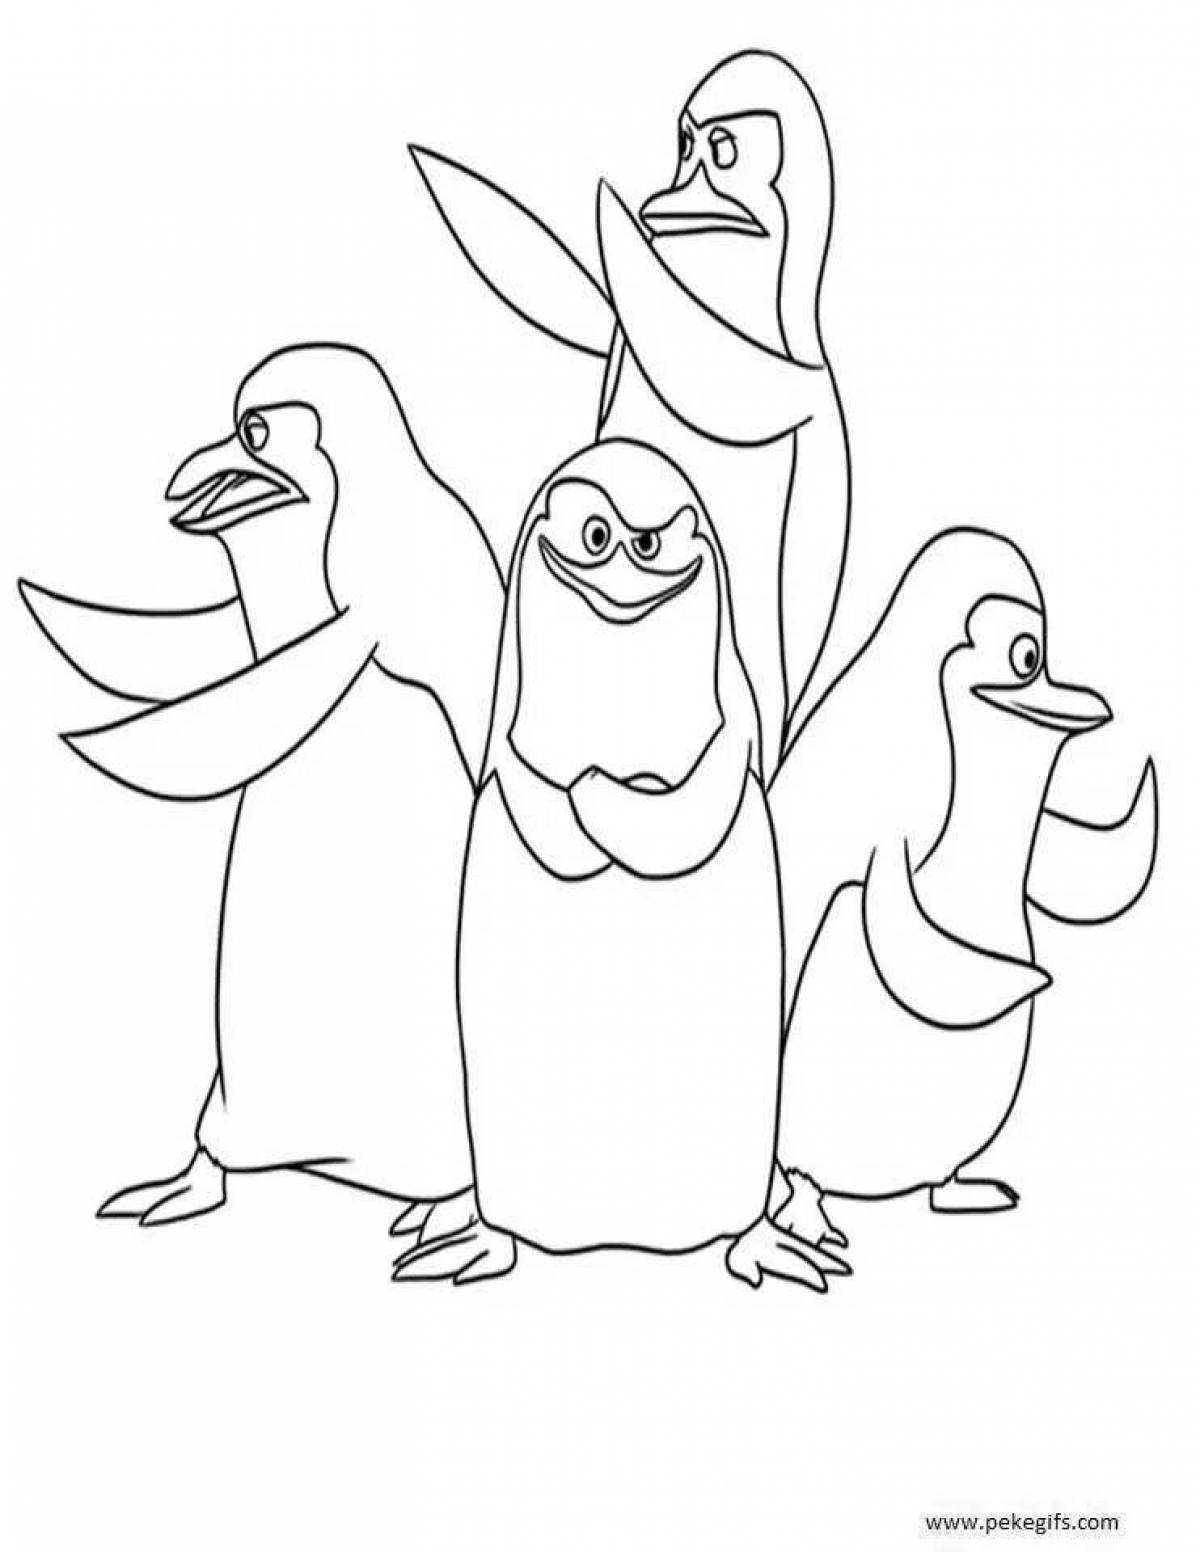 Fancy penguins from Madagascar